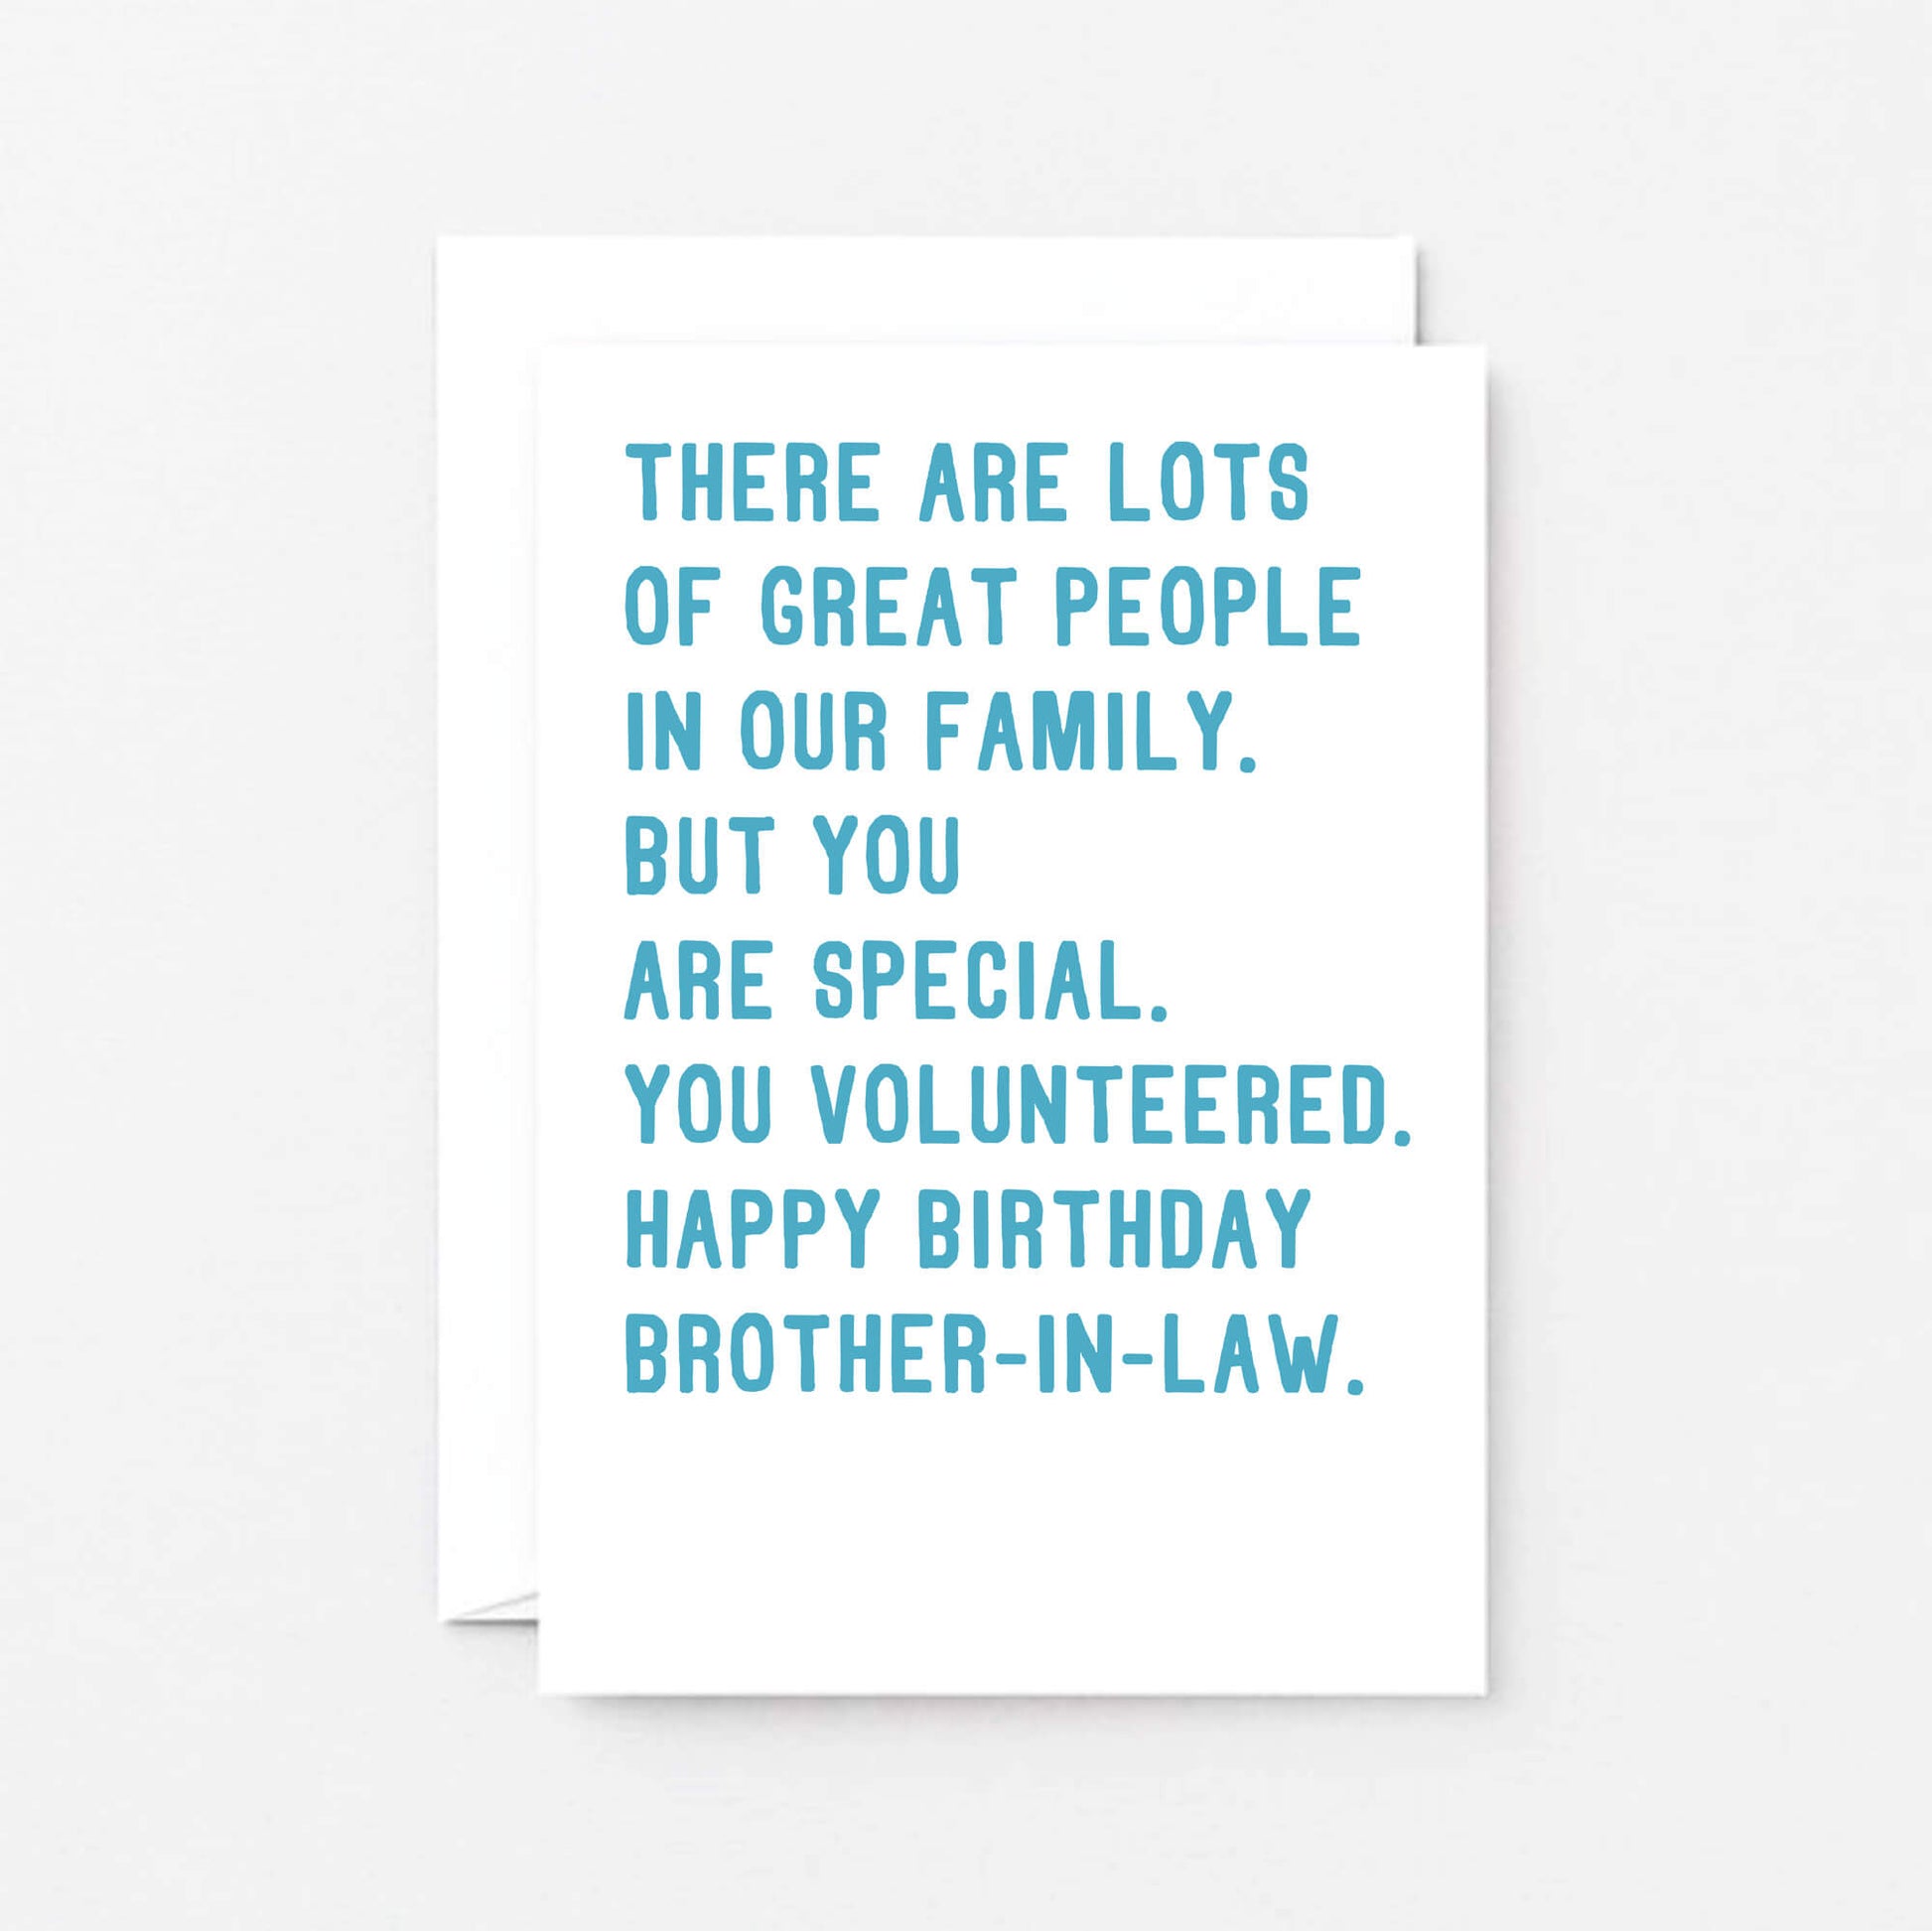 Brother-in-Law Birthday Card by SixElevenCreations. Reads There are lots of great people in our family. But you are special. You volunteered. Happy birthday brother-in-law. Product Code SE2071A6